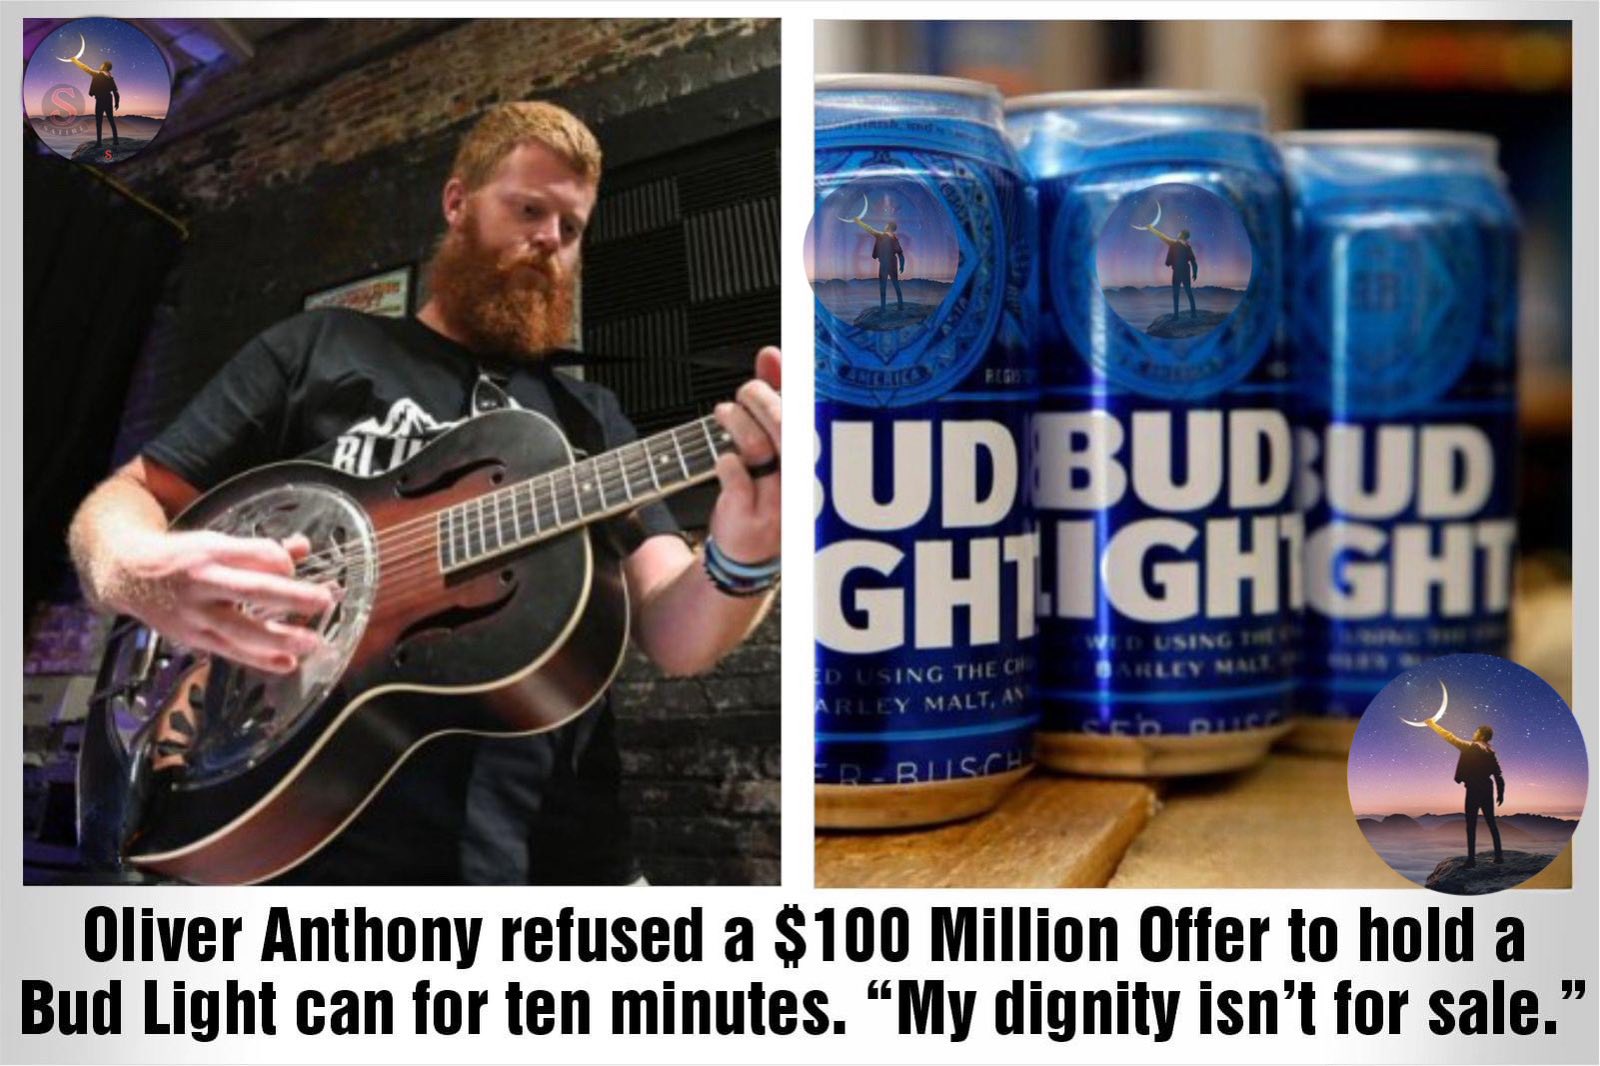 Oliver Anthony Refused a $100 Million Offer to Hold a Bud Light Can for Ten Minutes: “My Dignity Isn’t For Sale.”